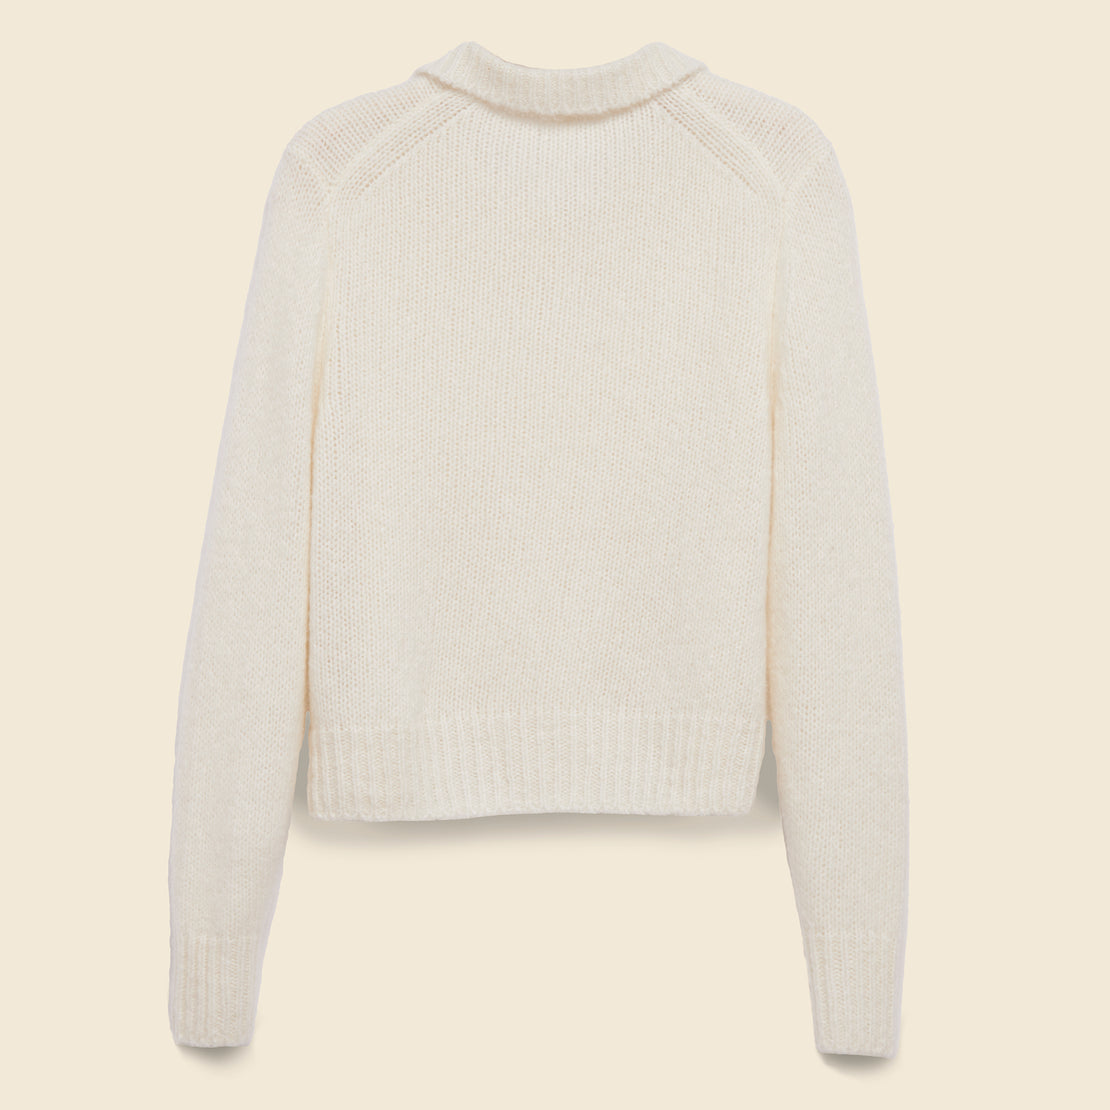 Frank Henley Sweater - Ivory - Alex Mill - STAG Provisions - W - Tops - Sweater